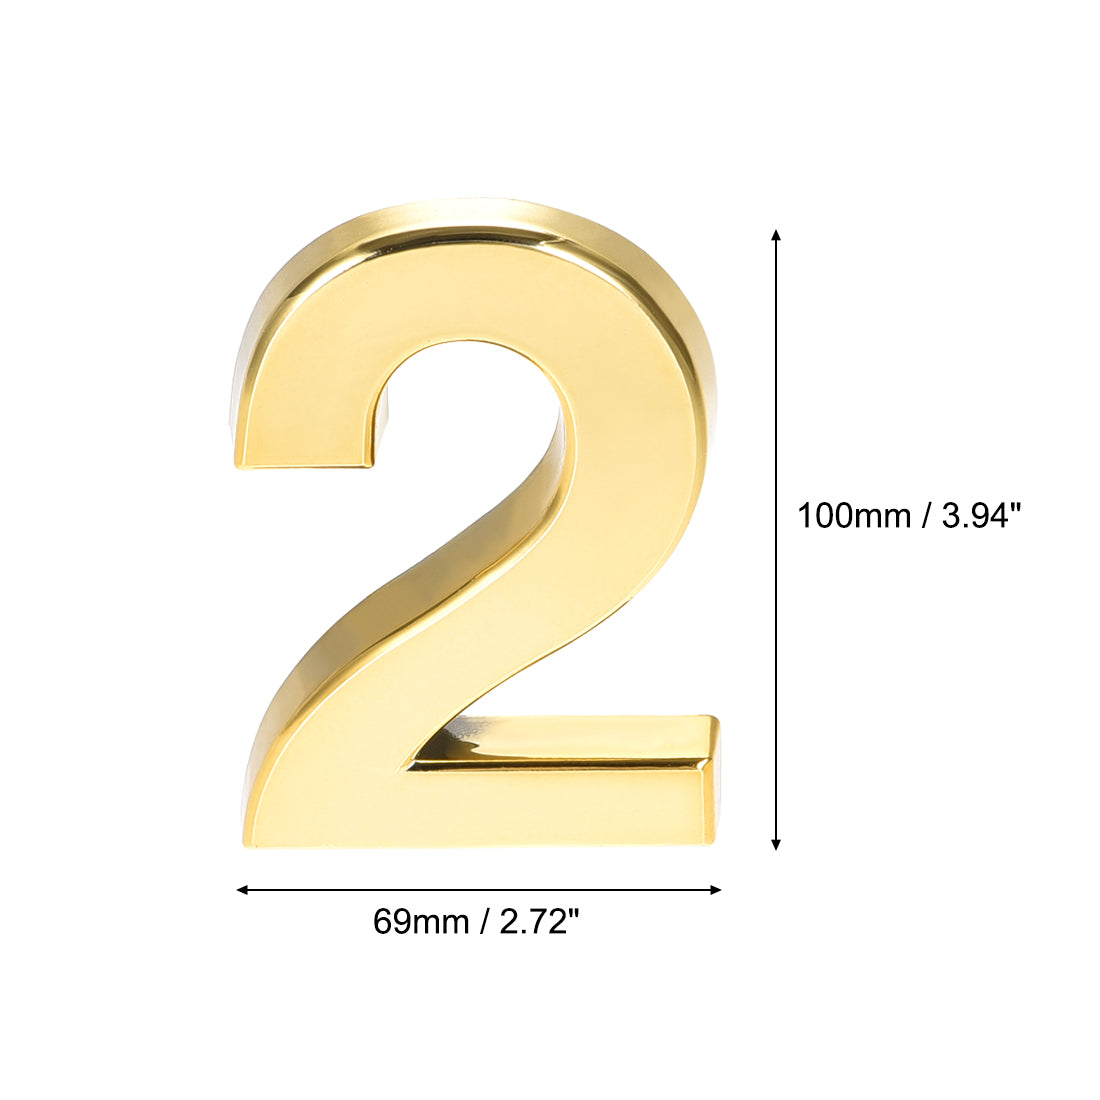 Uxcell Uxcell Self Adhesive House Number 3.94 Inch ABS Plastic Number 9 for House Hotel Mailbox Address Sign Gold Tone